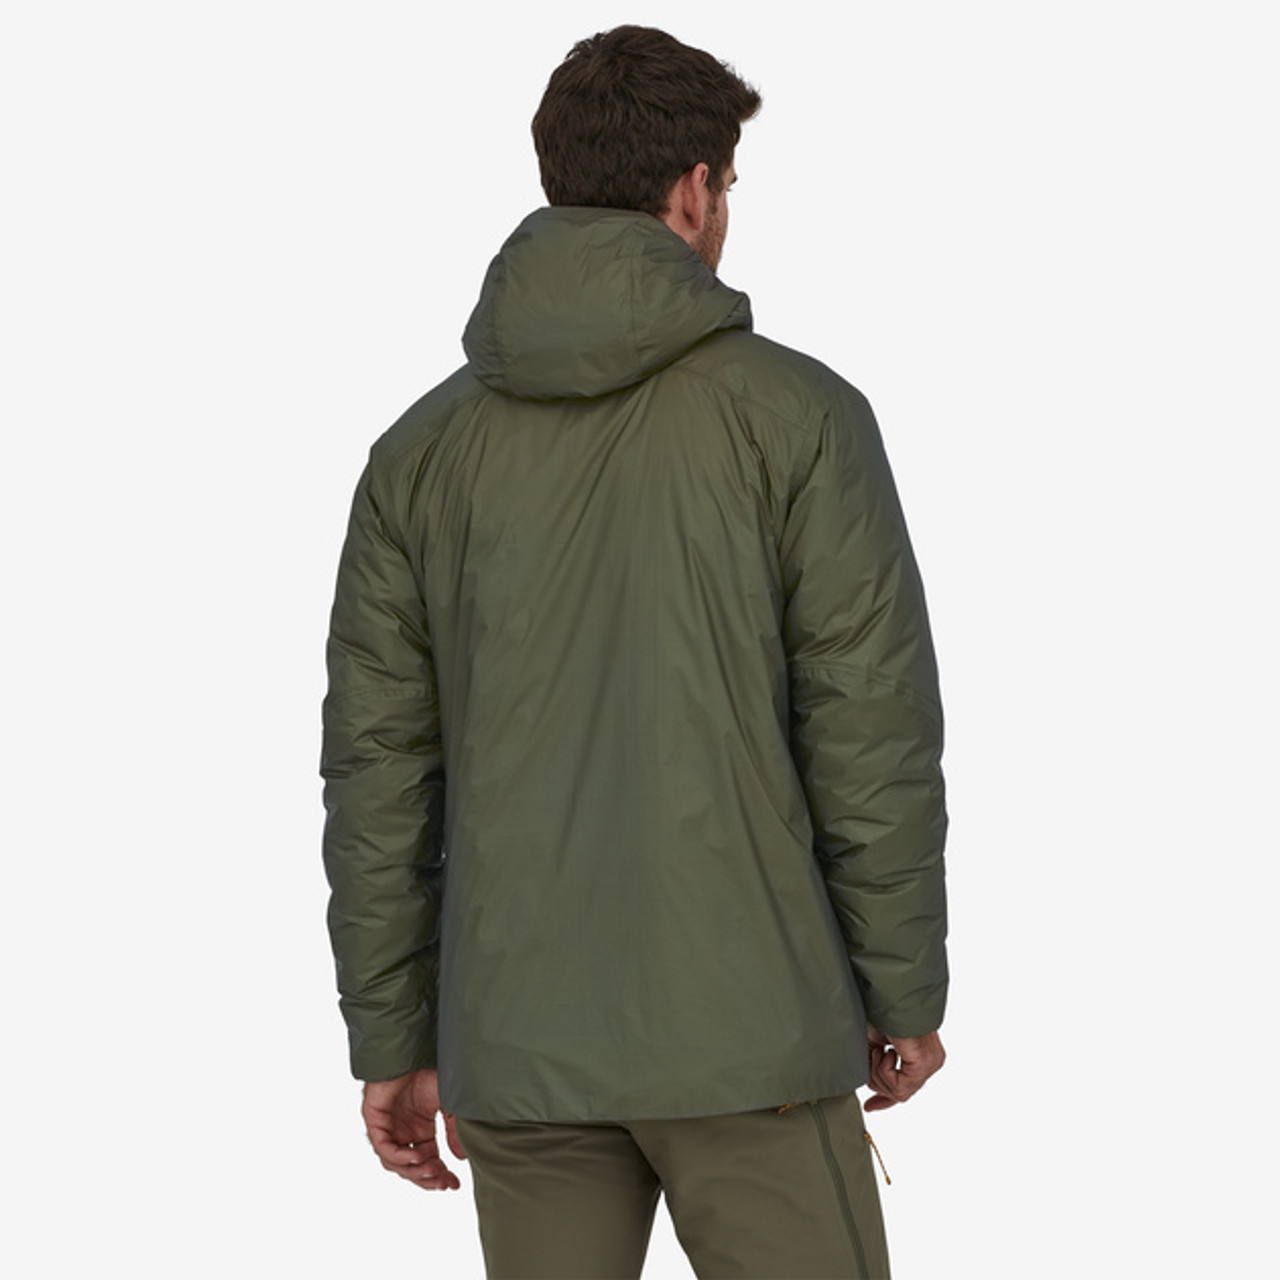 Patagonia Micro Puff Storm Jacket - Updated with more PlumaFill 